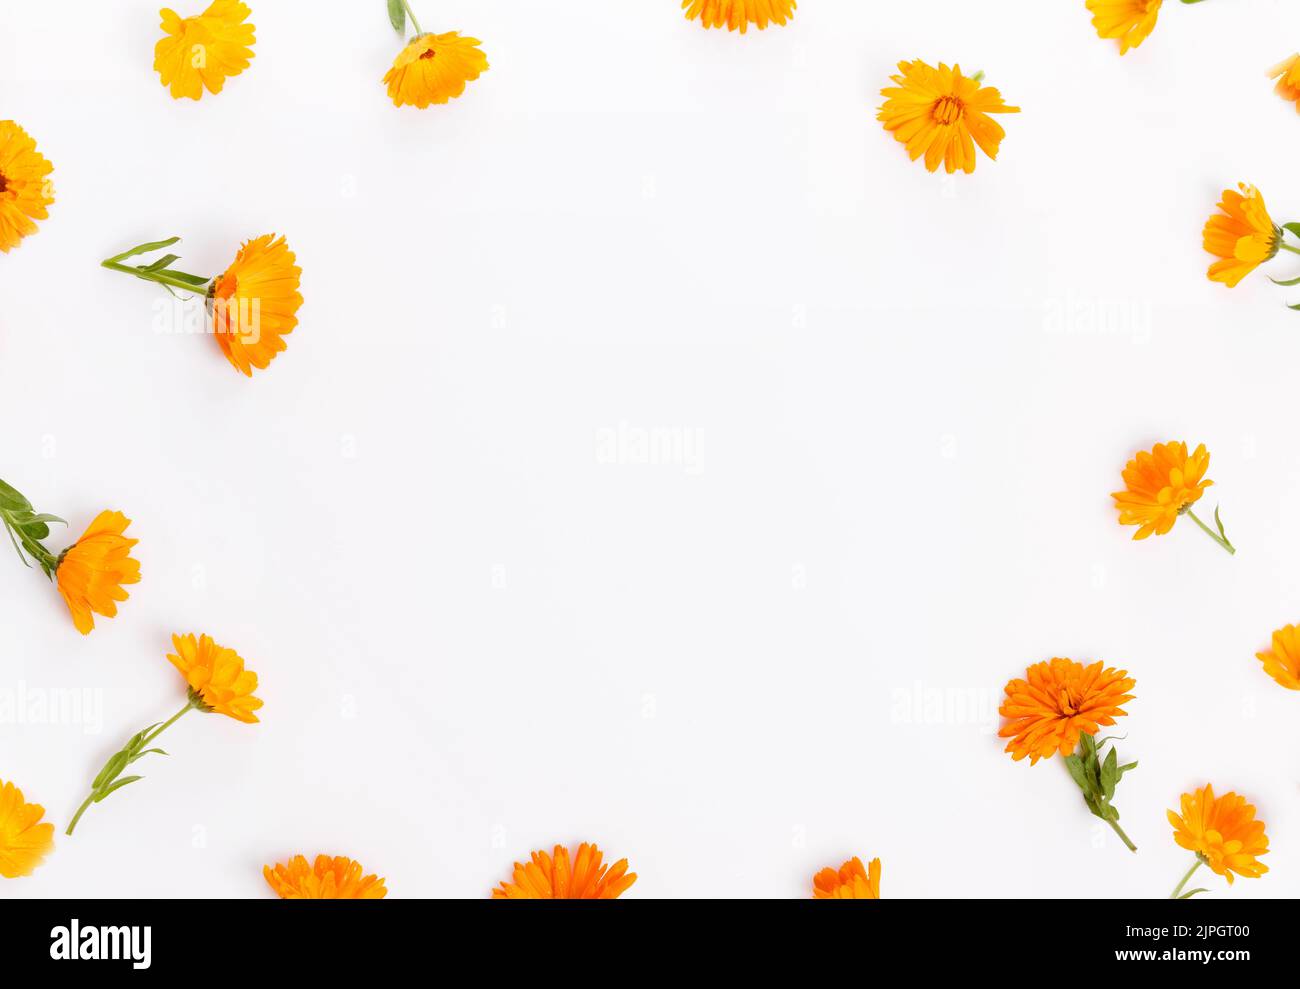 Calendula. Marigold flower isolated on white background. Top view. Flat lay pattern Stock Photo